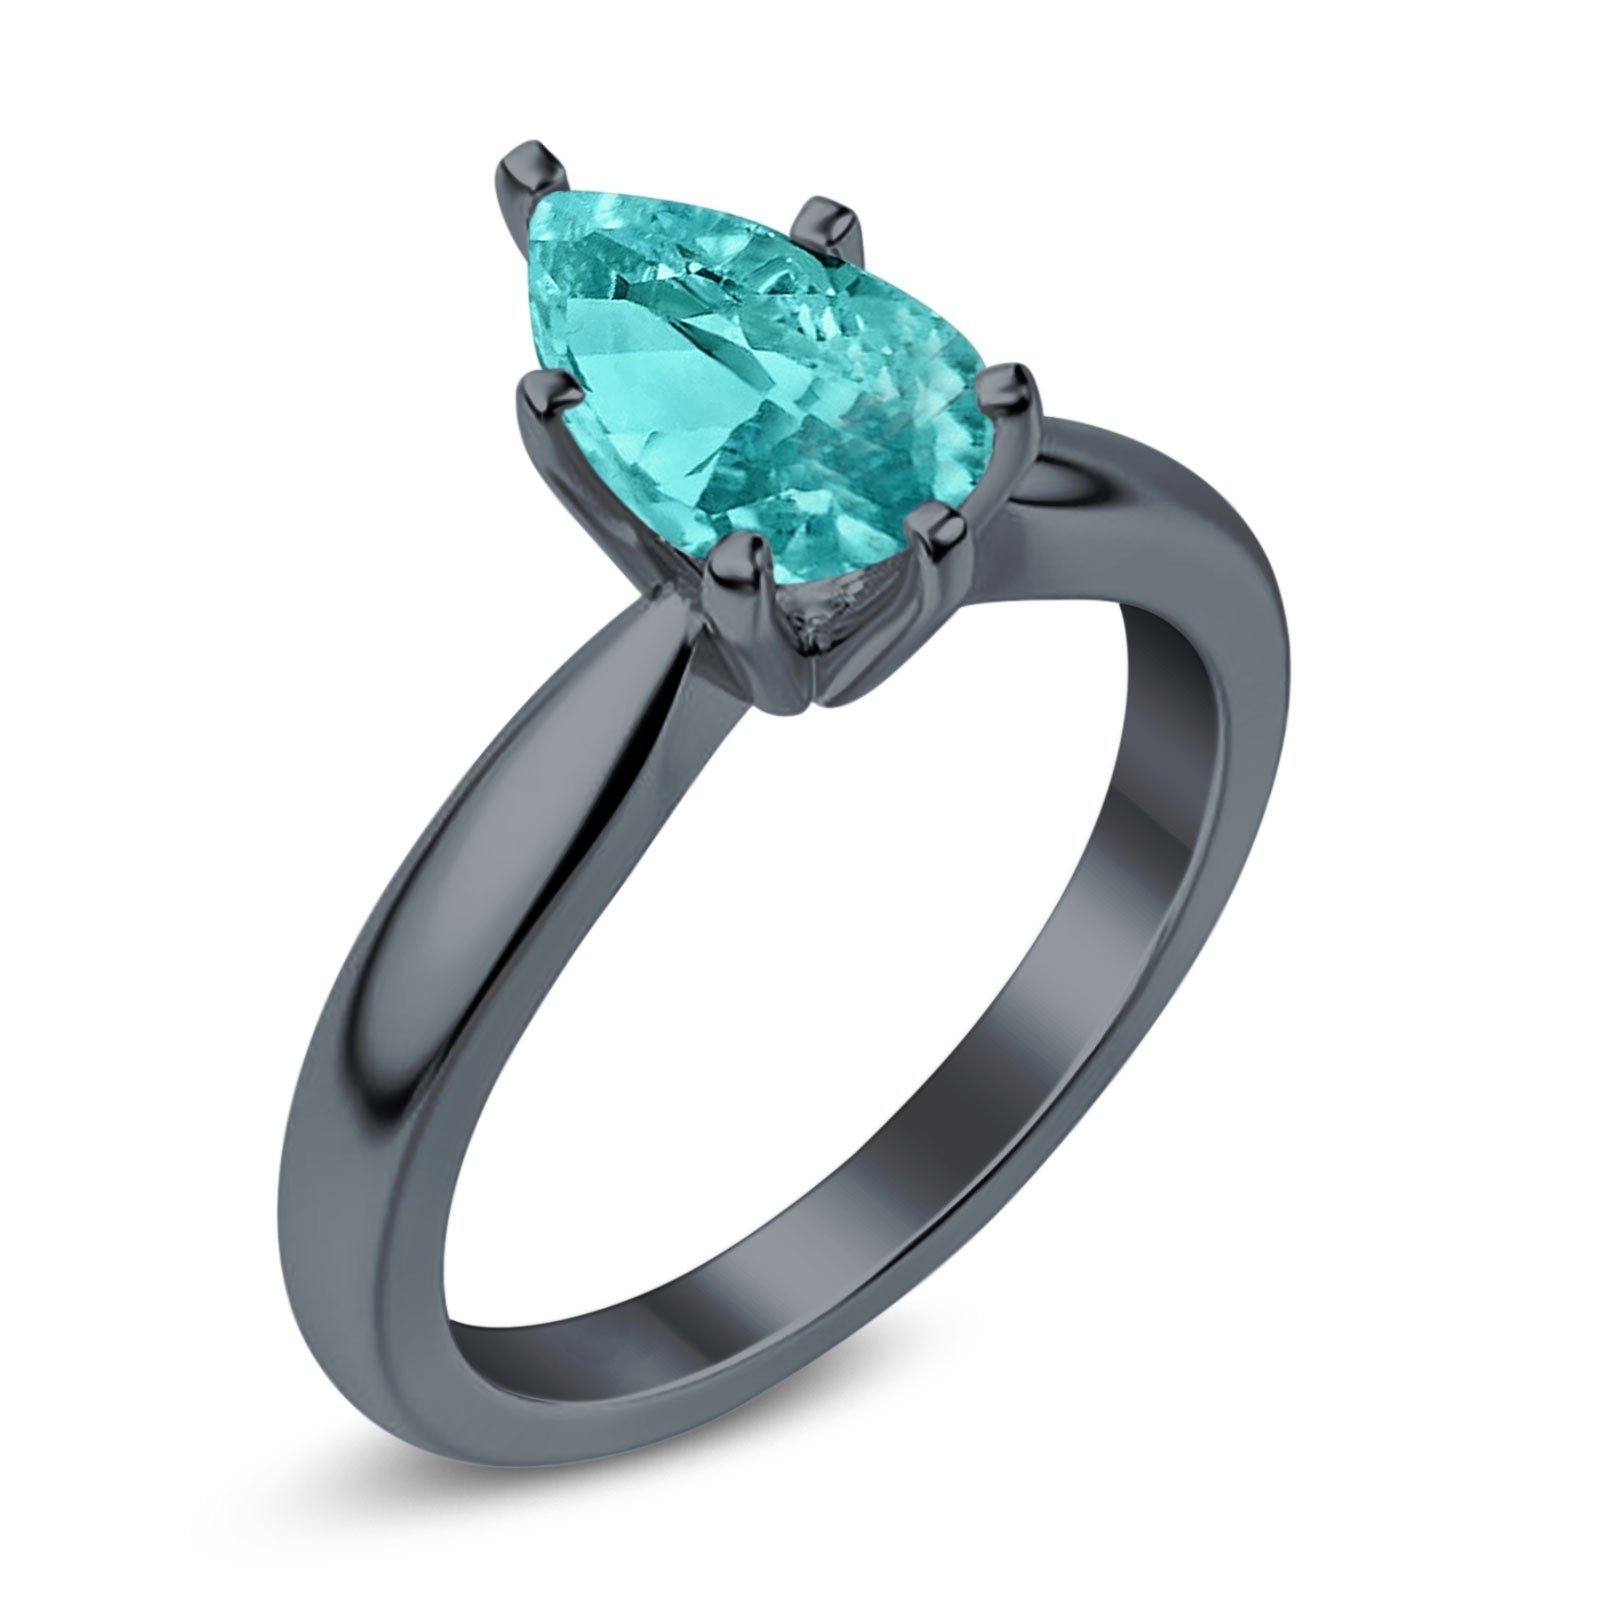 Solitaire Teardrop Black Tone, Simulated Paraiba Tourmaline CZ Wedding Ring 925 Sterling Silver Center Stone-(8mmx6mm)